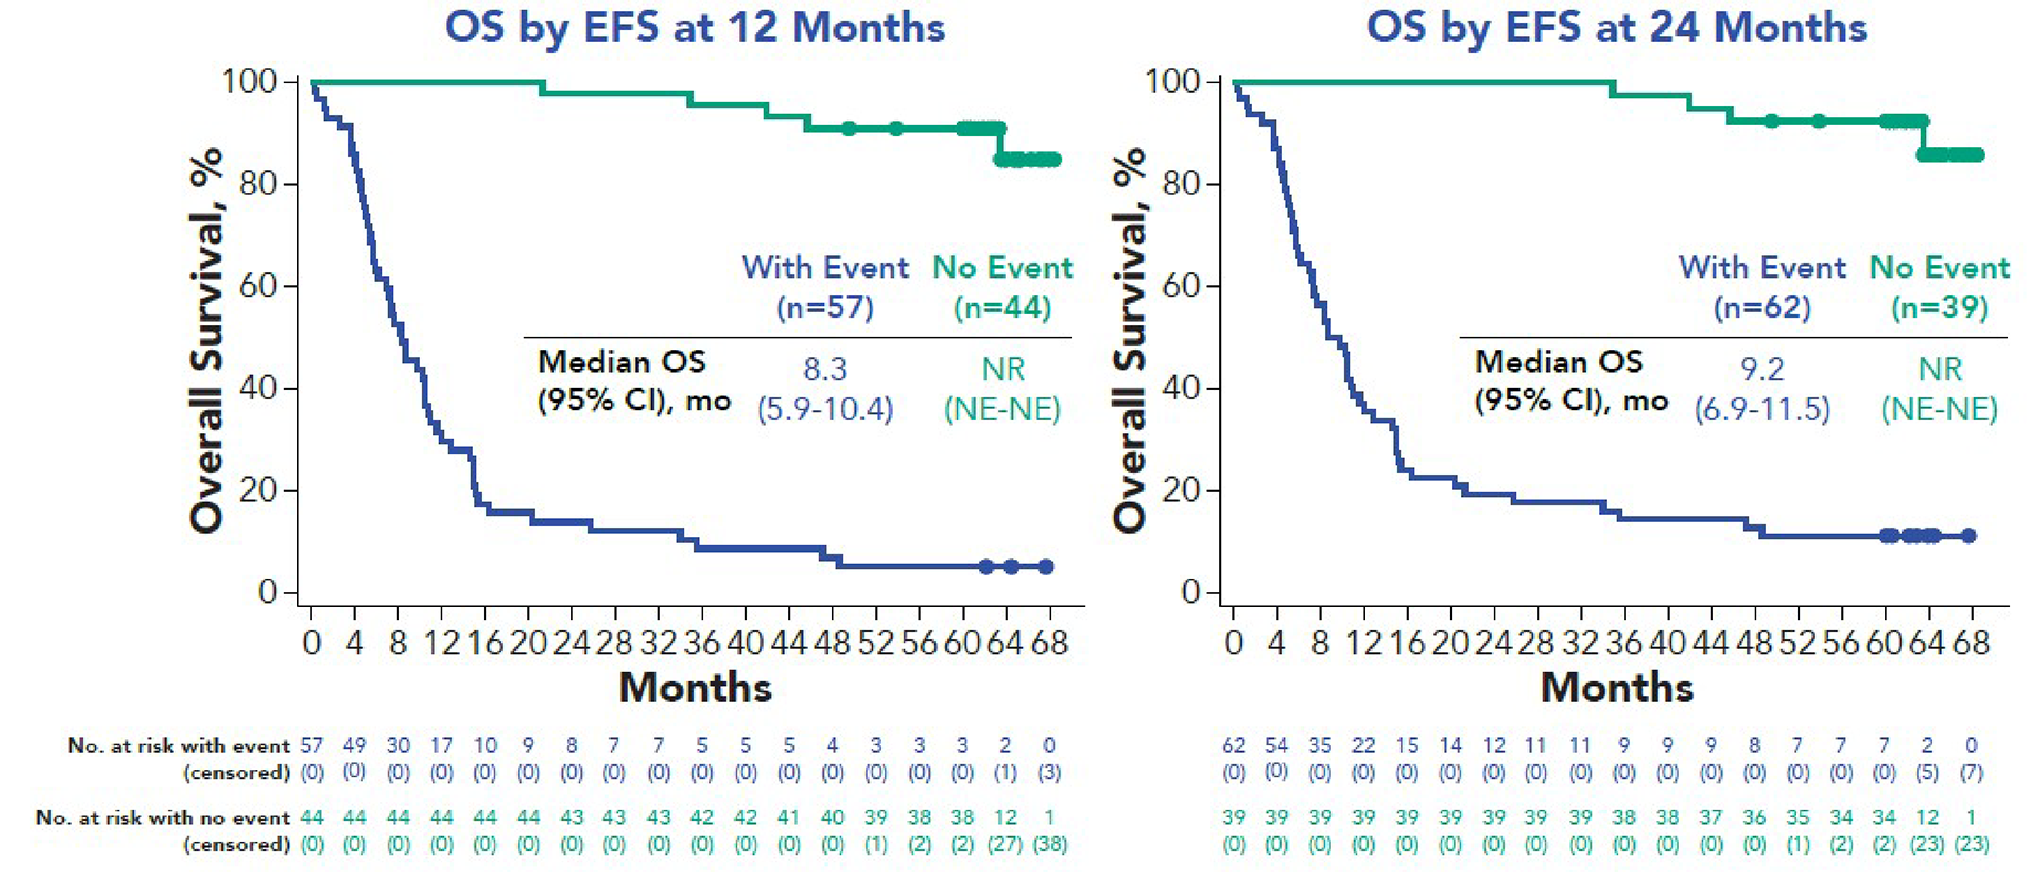 One Kaplan-Meier graph depicting OS by EFS at 12 months and another Kaplan-Meier graph depicting OS by EFS at 24 months. The y-axes are overall survival ranging from 0% to 100%; the x-axes are months ranging from 0 to 68. In both graphs, the curves separate immediately with the “no event” curve above the “with event” curve, and they do not cross. Also in both graphs, the “with event” curve plateaus at approximately 48 months and the “no event” curve plateaus at approximately 46 months.